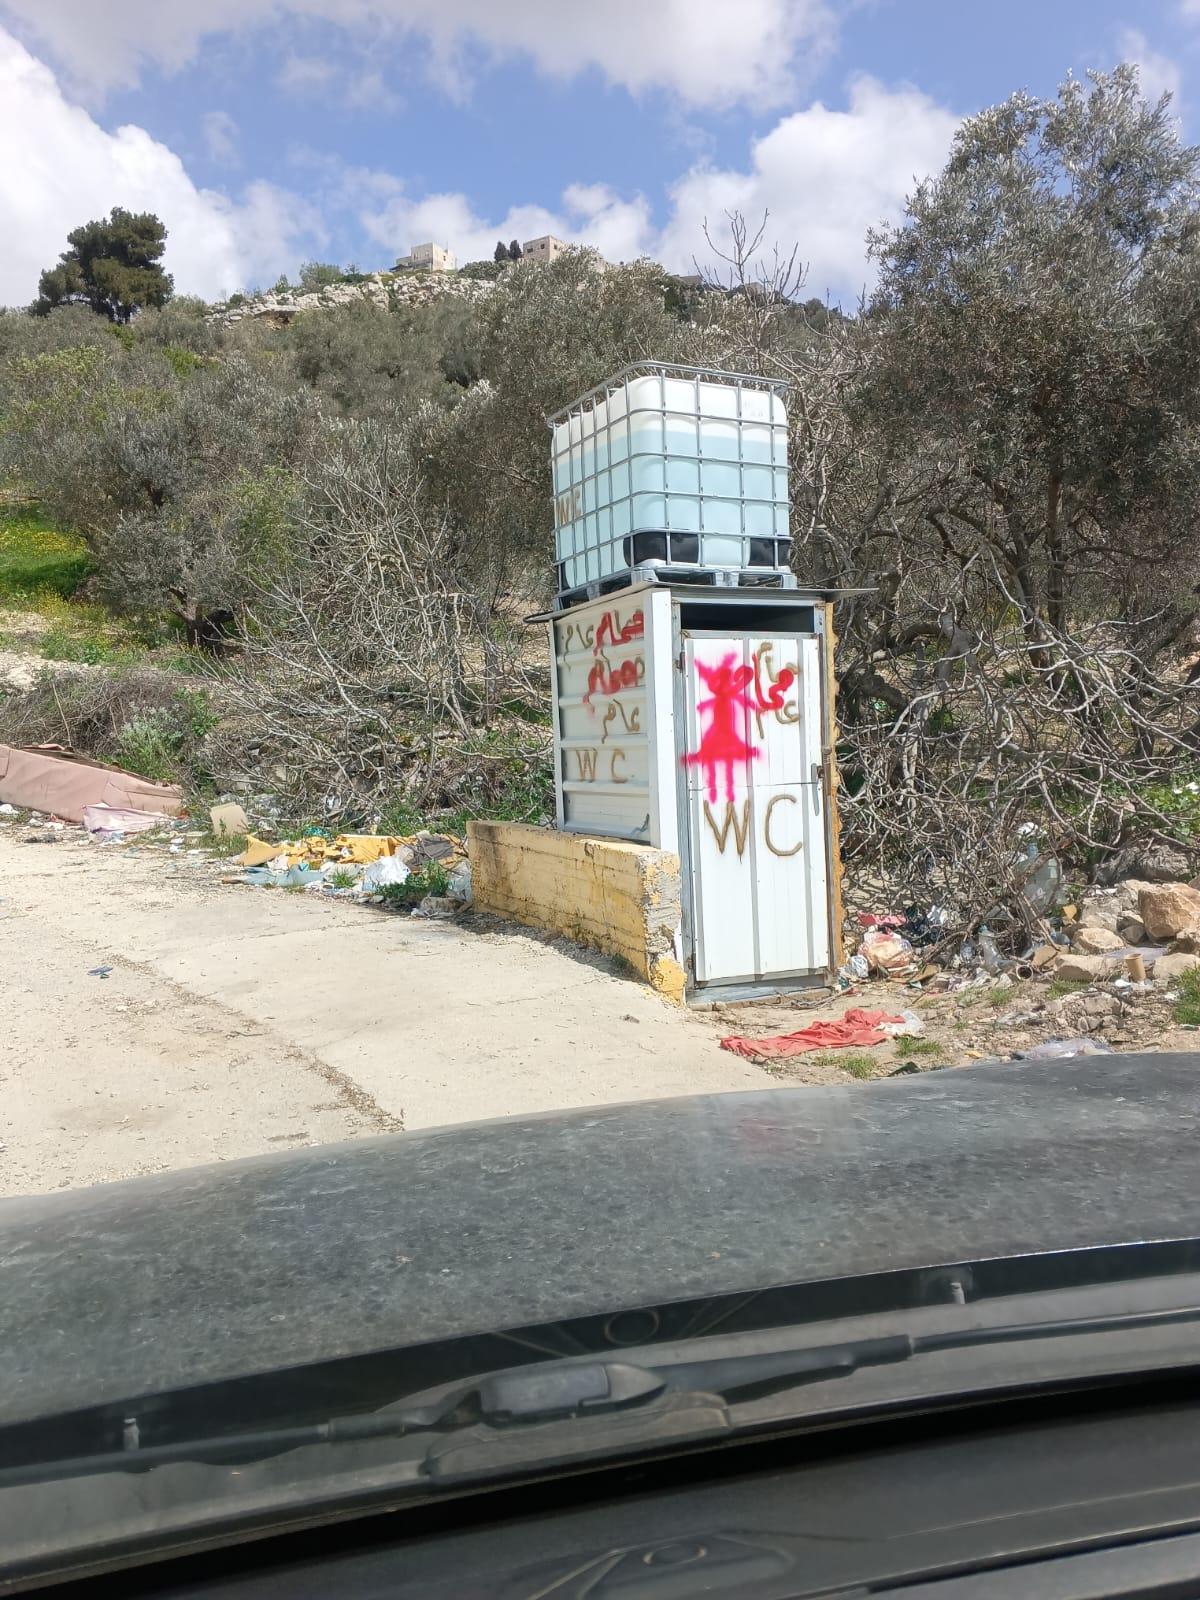 Public women's toilet built by Women Support Center for Nablus checkpoint.